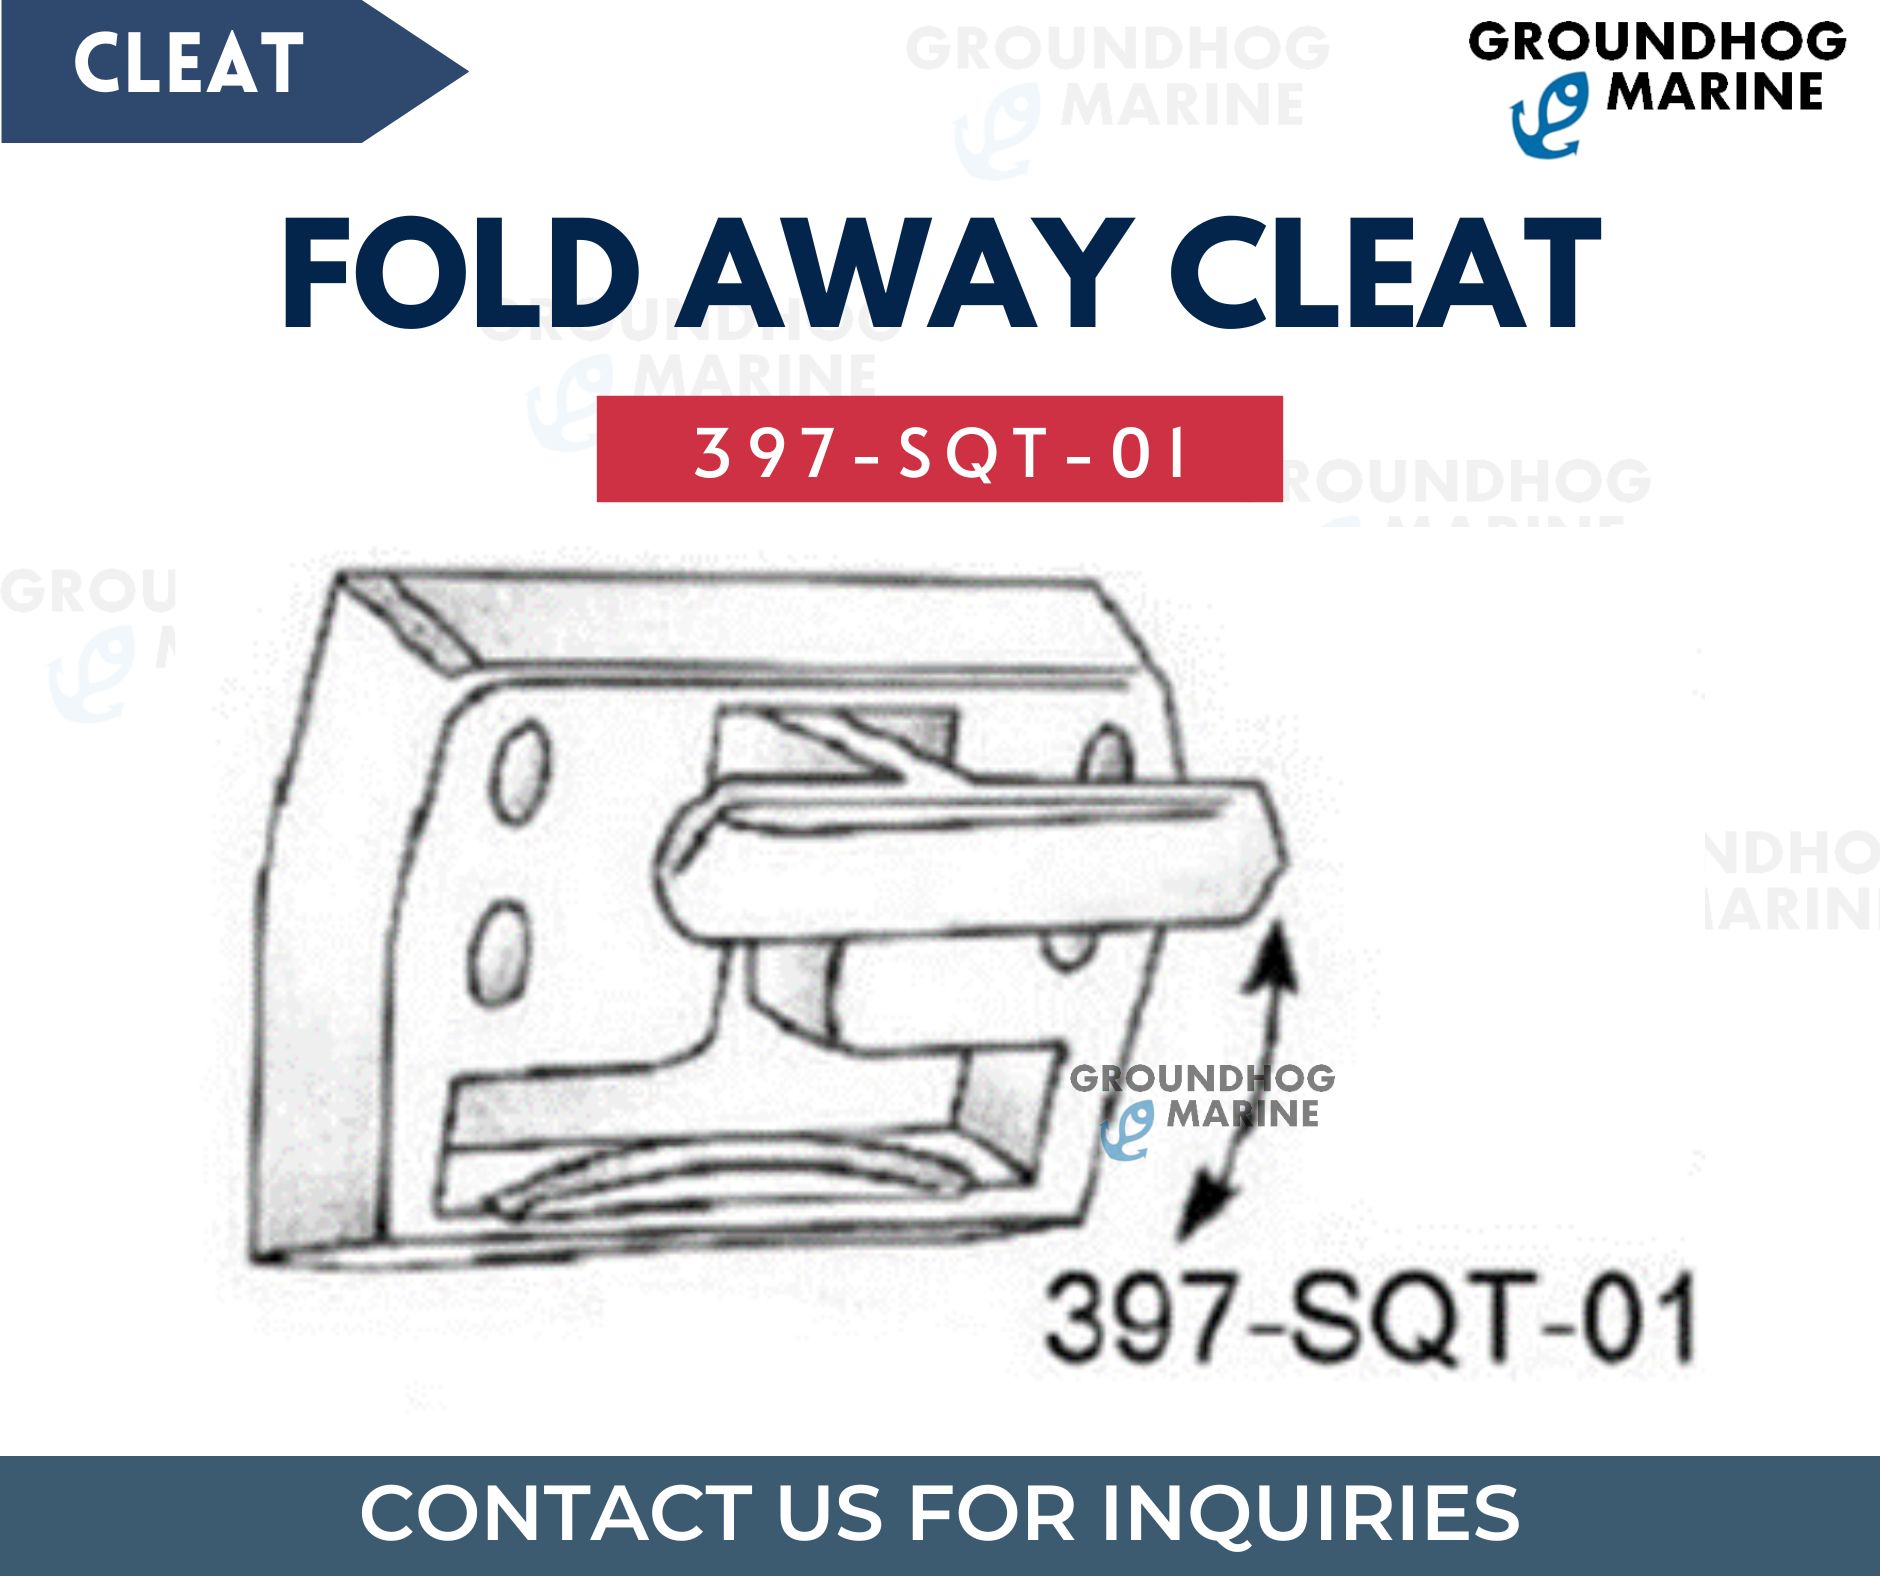 Boat FOLD AWAY CLEAT - photo